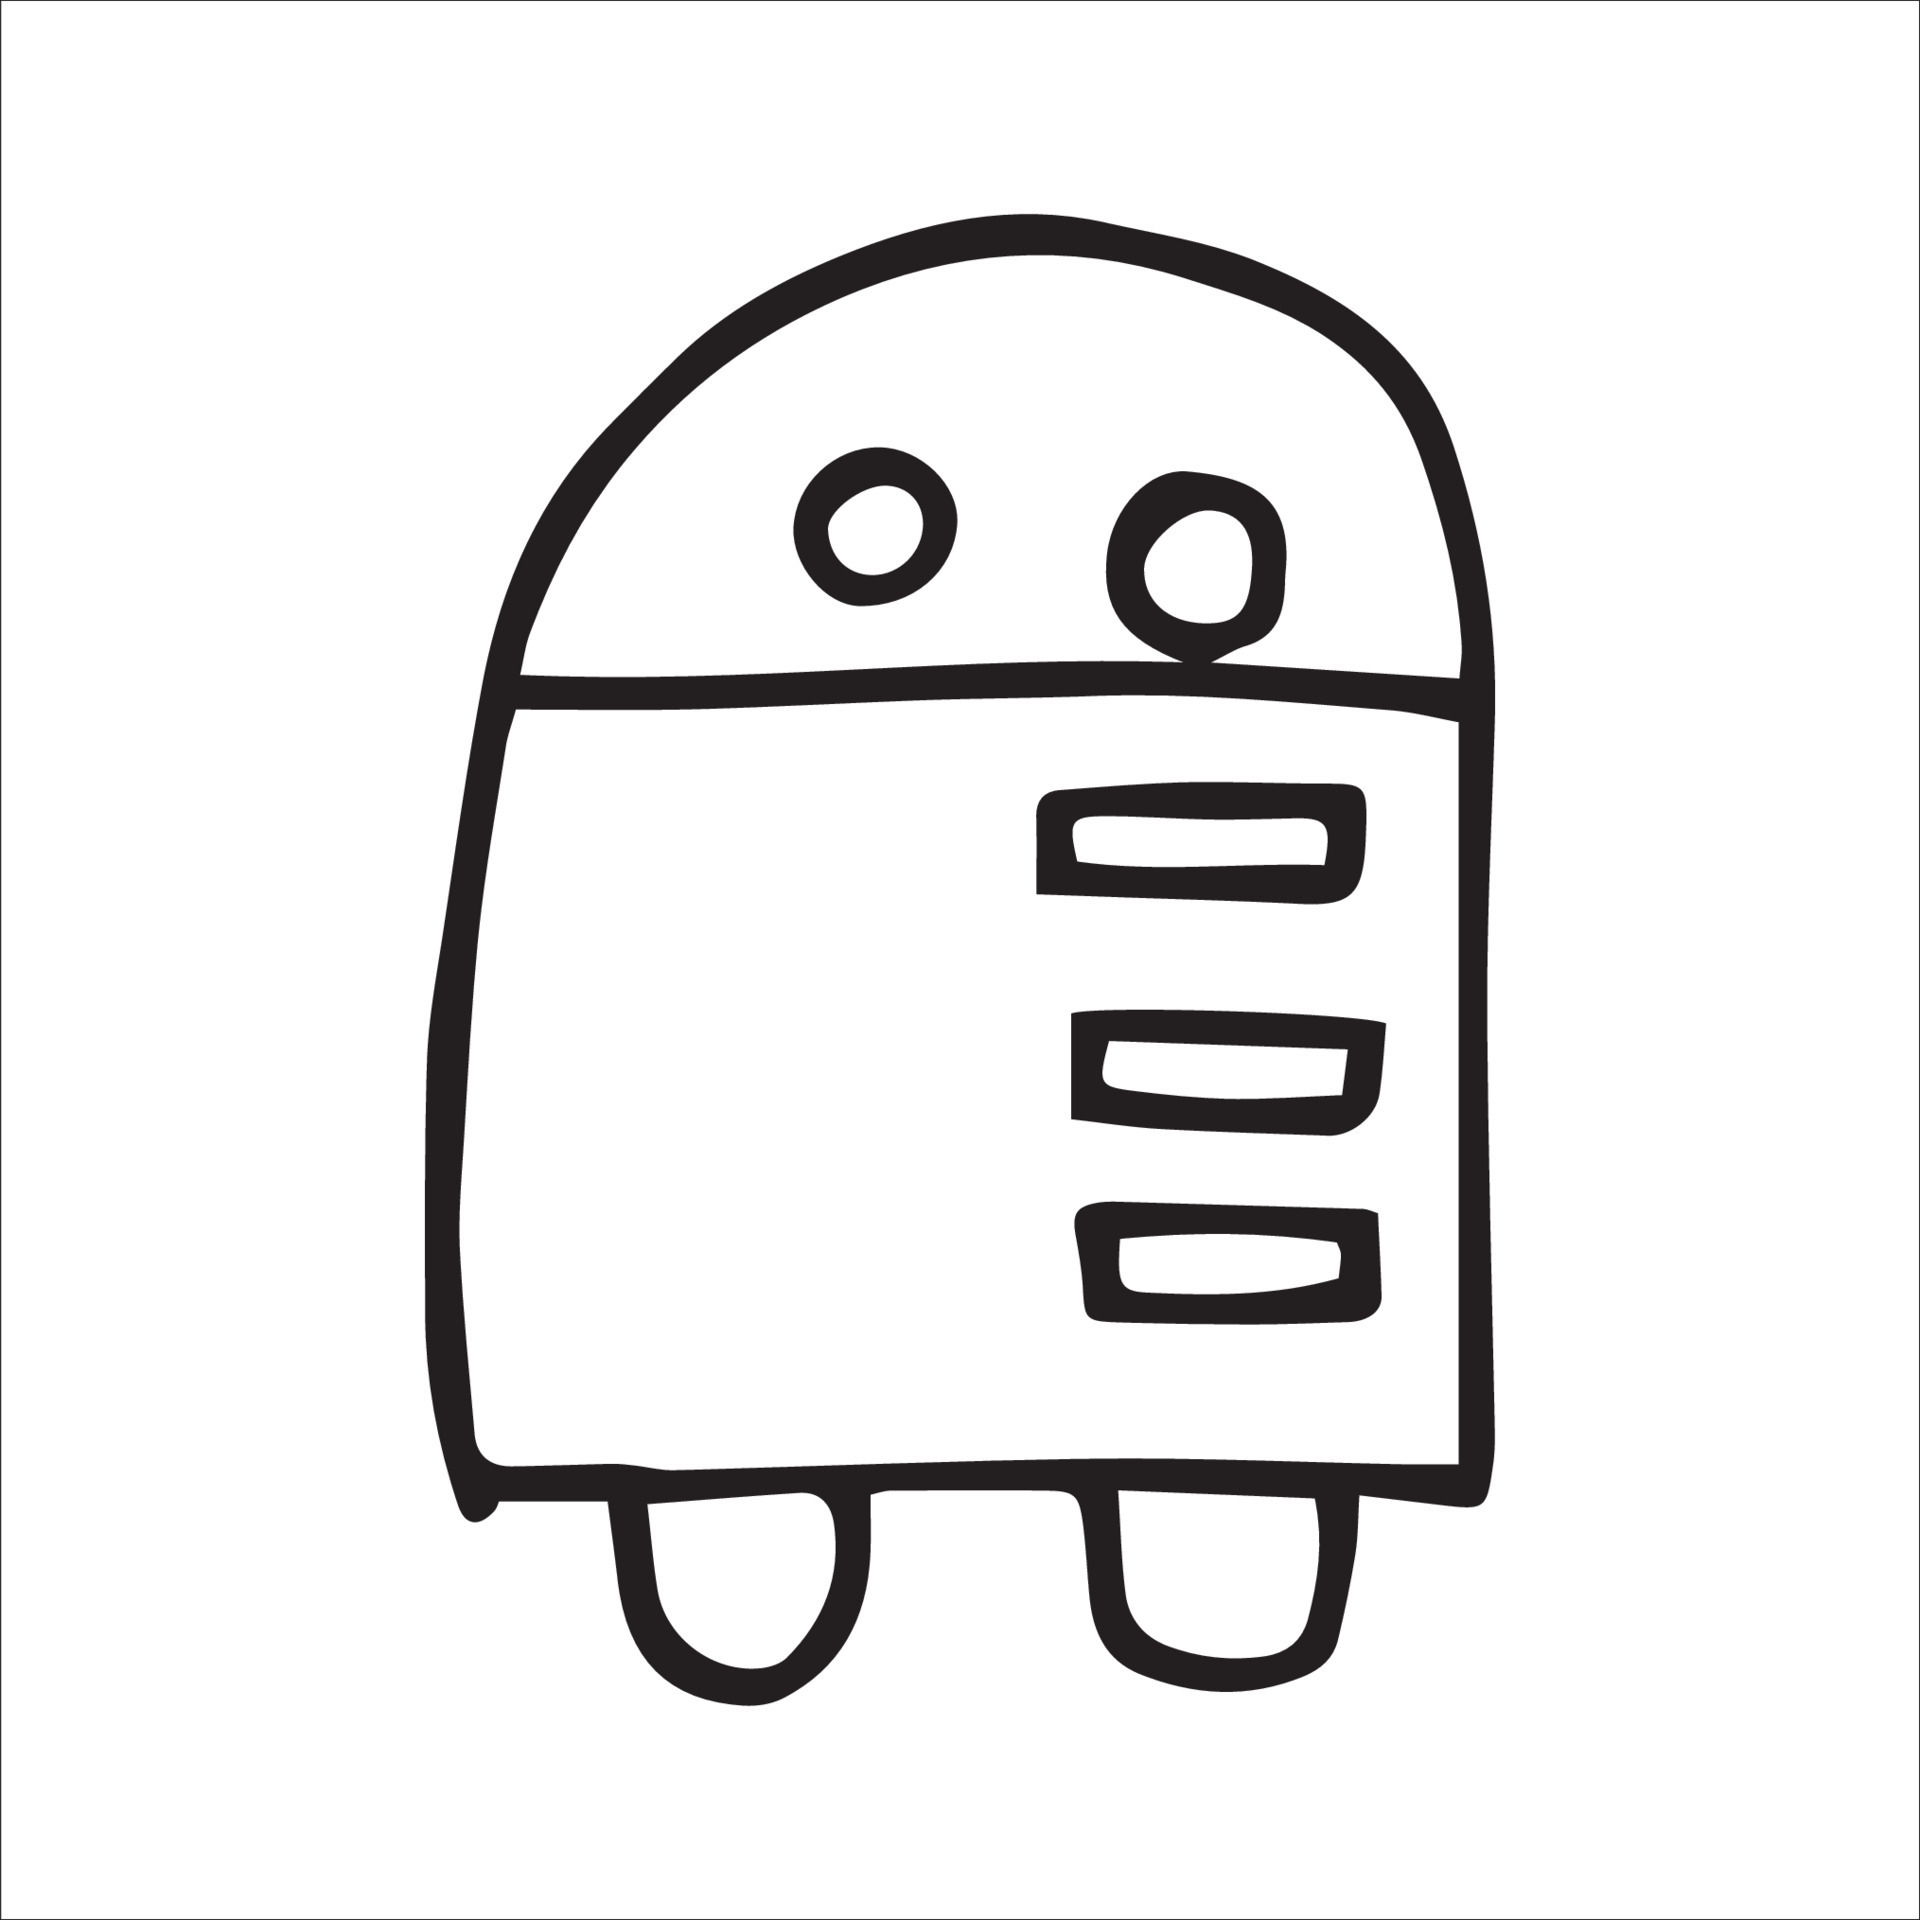 https://static.vecteezy.com/system/resources/previews/010/403/242/original/simple-drawing-in-doodle-style-robot-cute-robot-hand-drawn-with-lines-funny-illustration-for-kids-free-vector.jpg